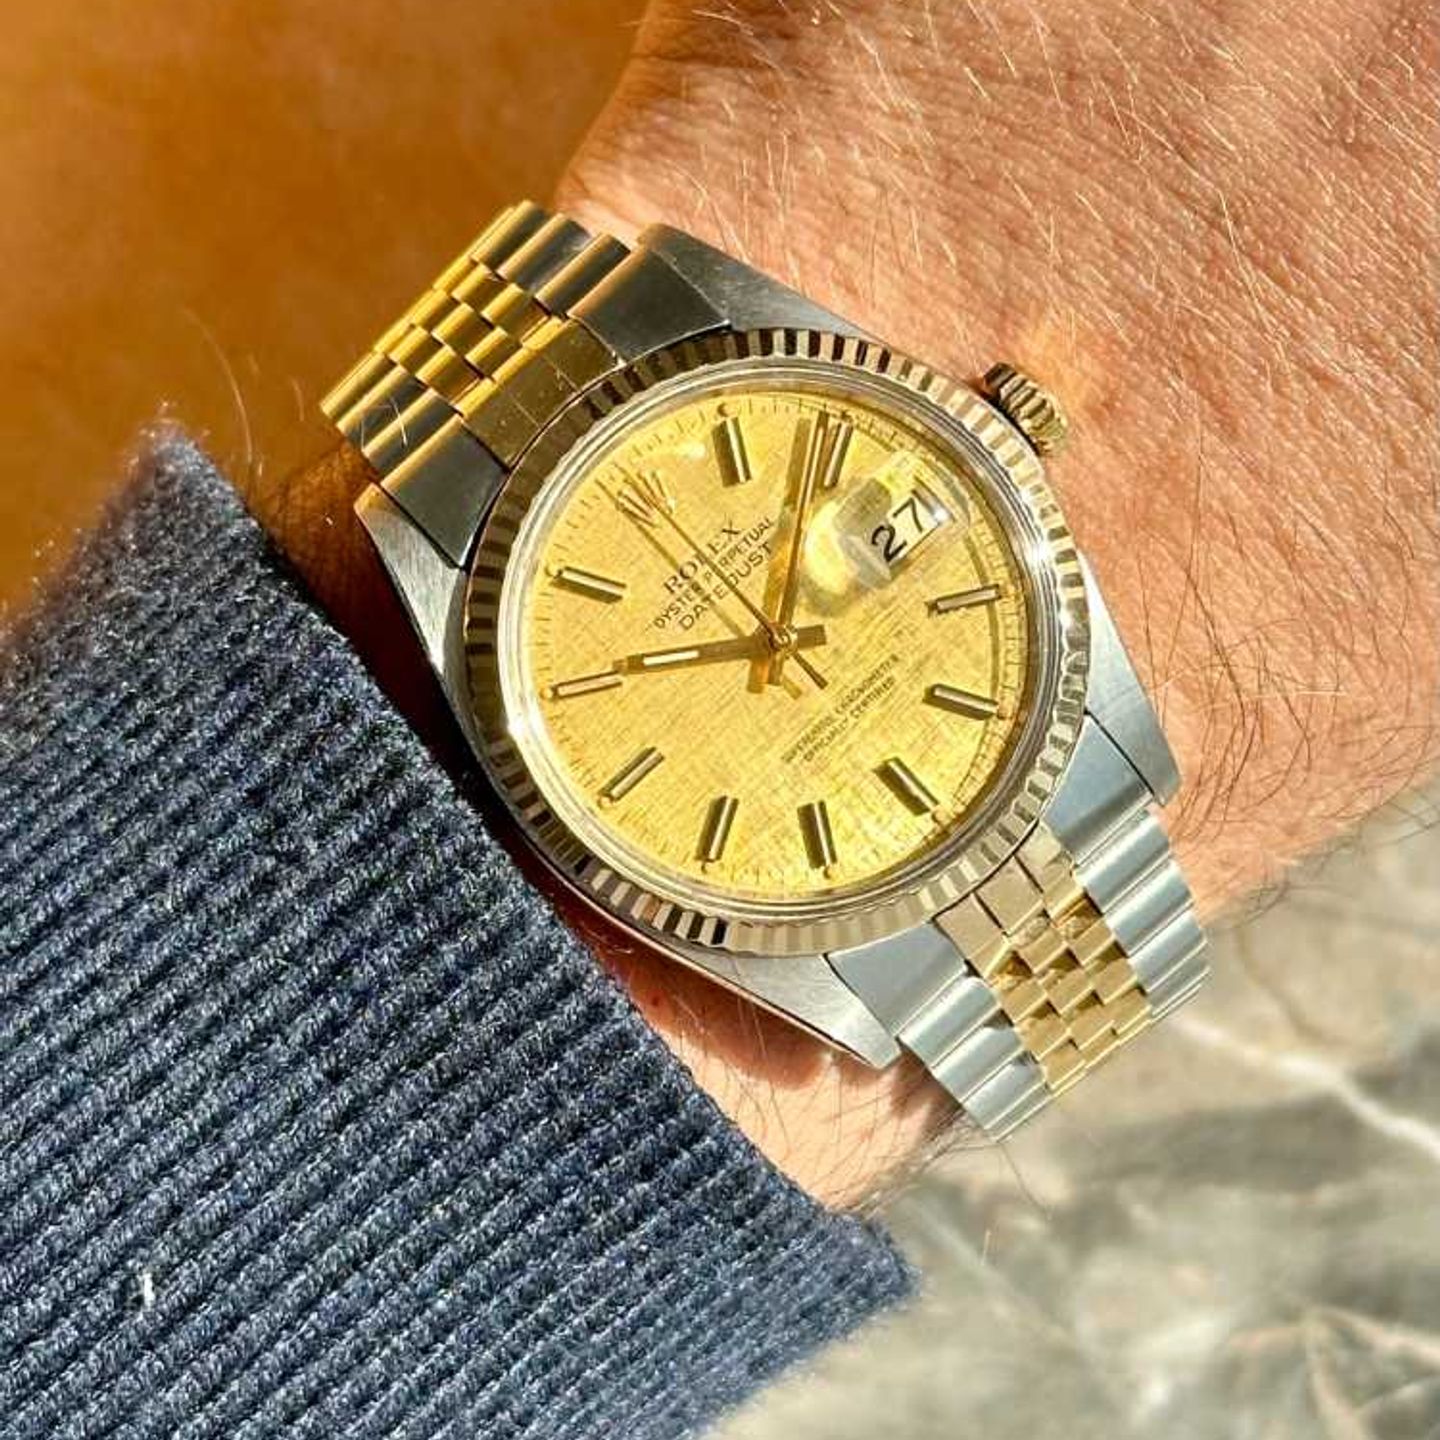 Rolex Datejust 36 16013 (1981) - Gold dial 36 mm Gold/Steel case (5/8)